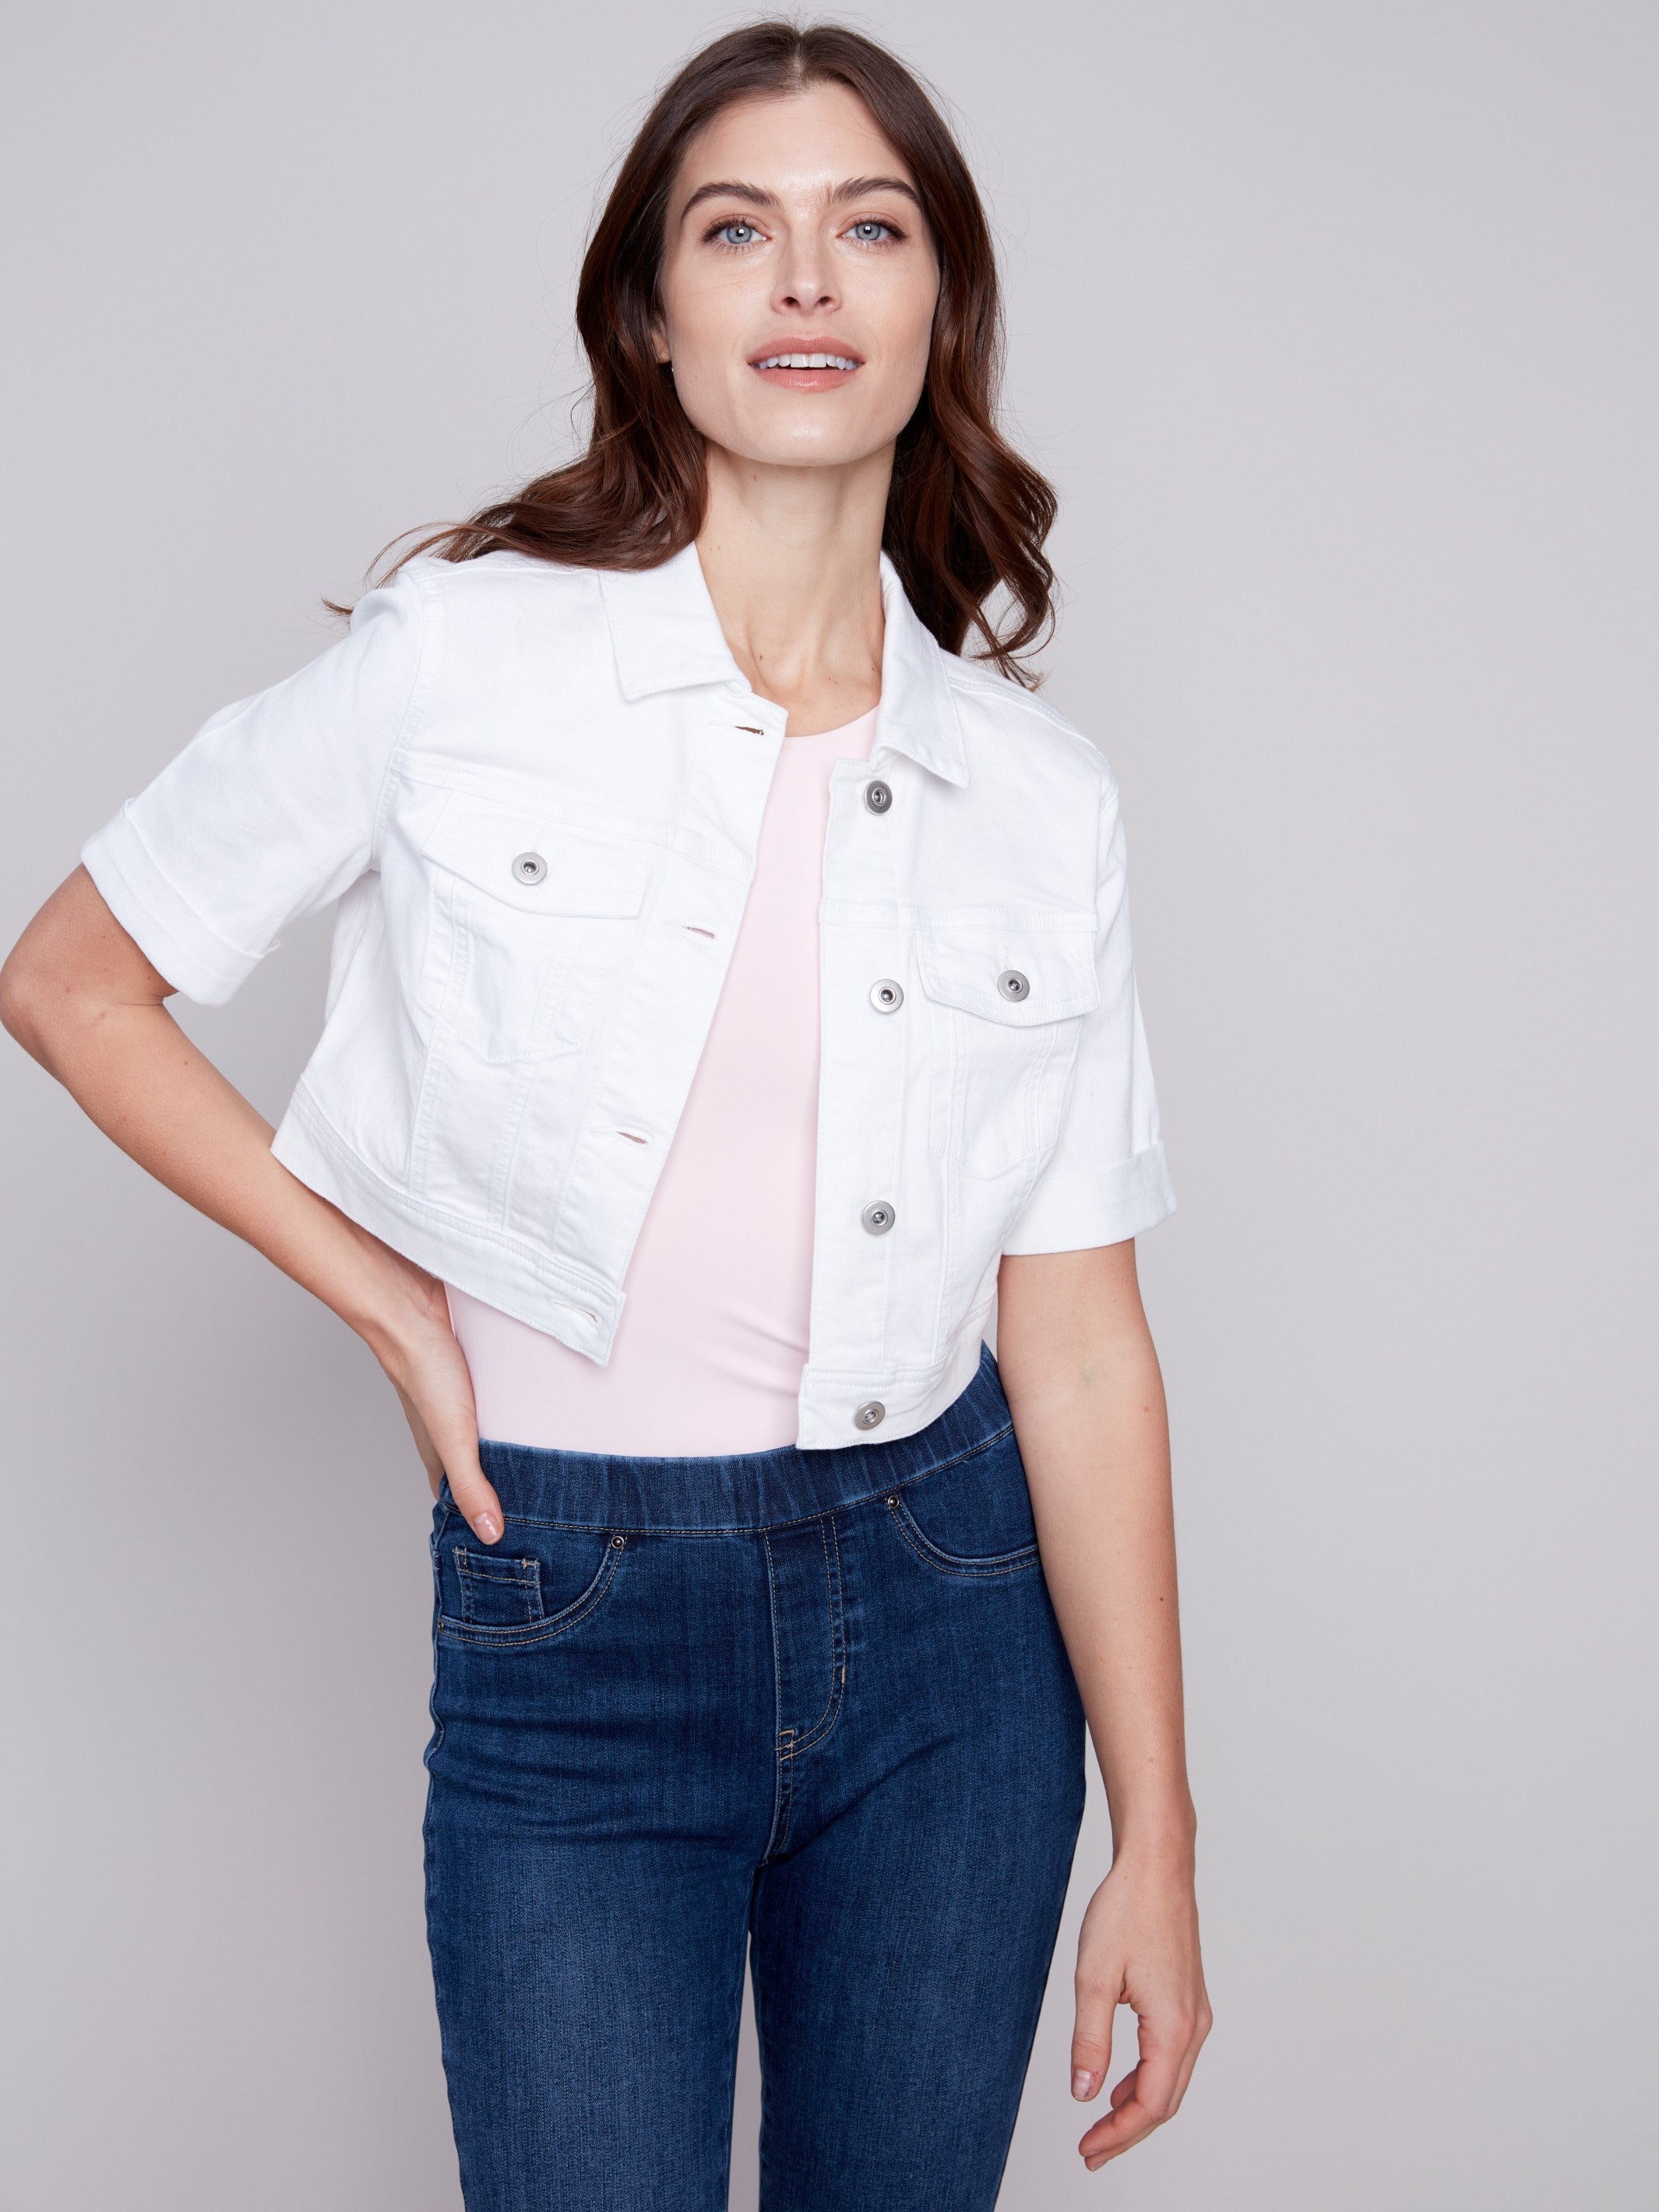 Charlie B Cropped Twill Jean Jacket - White - Image 3